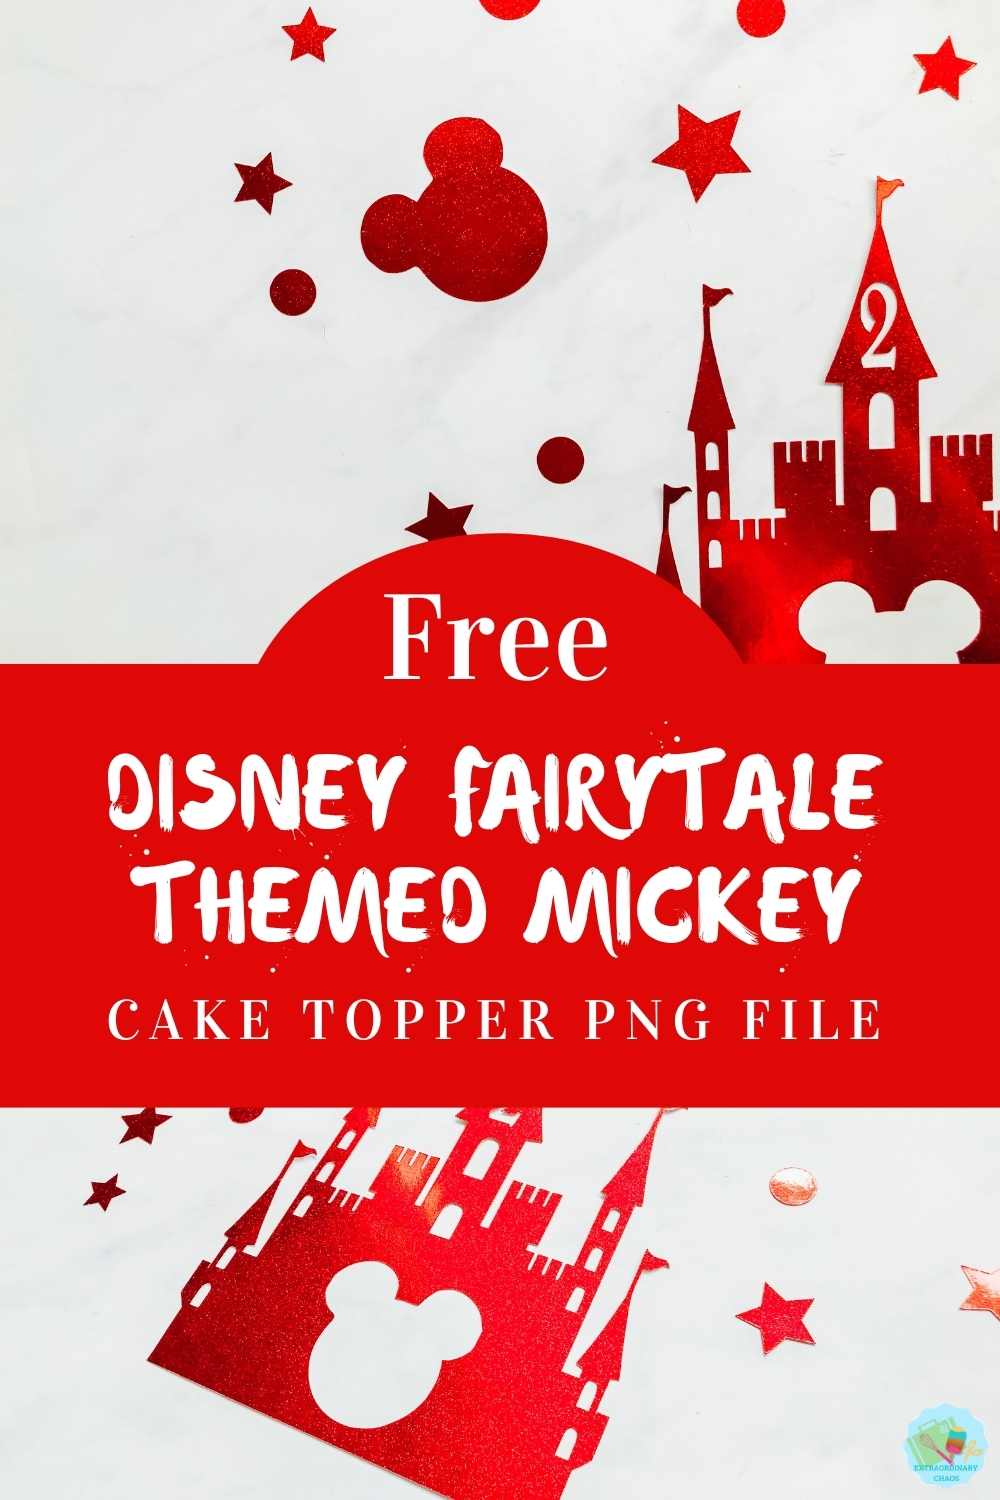 Free Disney Fairytale Themed Mickey Cake Topper for a magical themed birthday cake